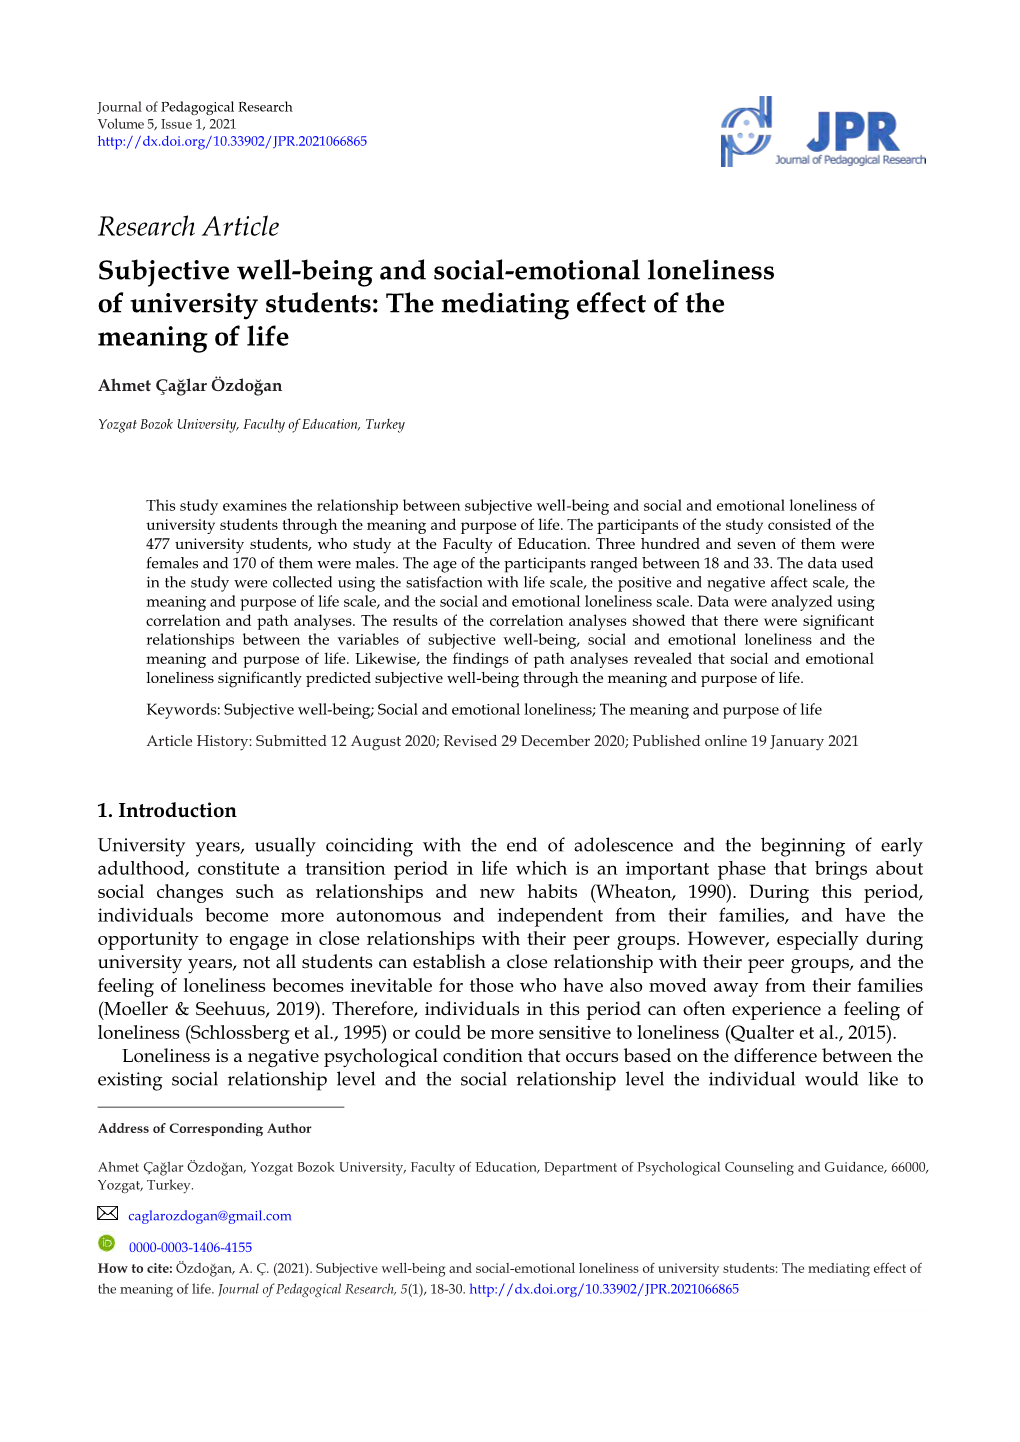 Research Article Subjective Well-Being and Social-Emotional Loneliness of University Students: the Mediating Effect of the Meaning of Life